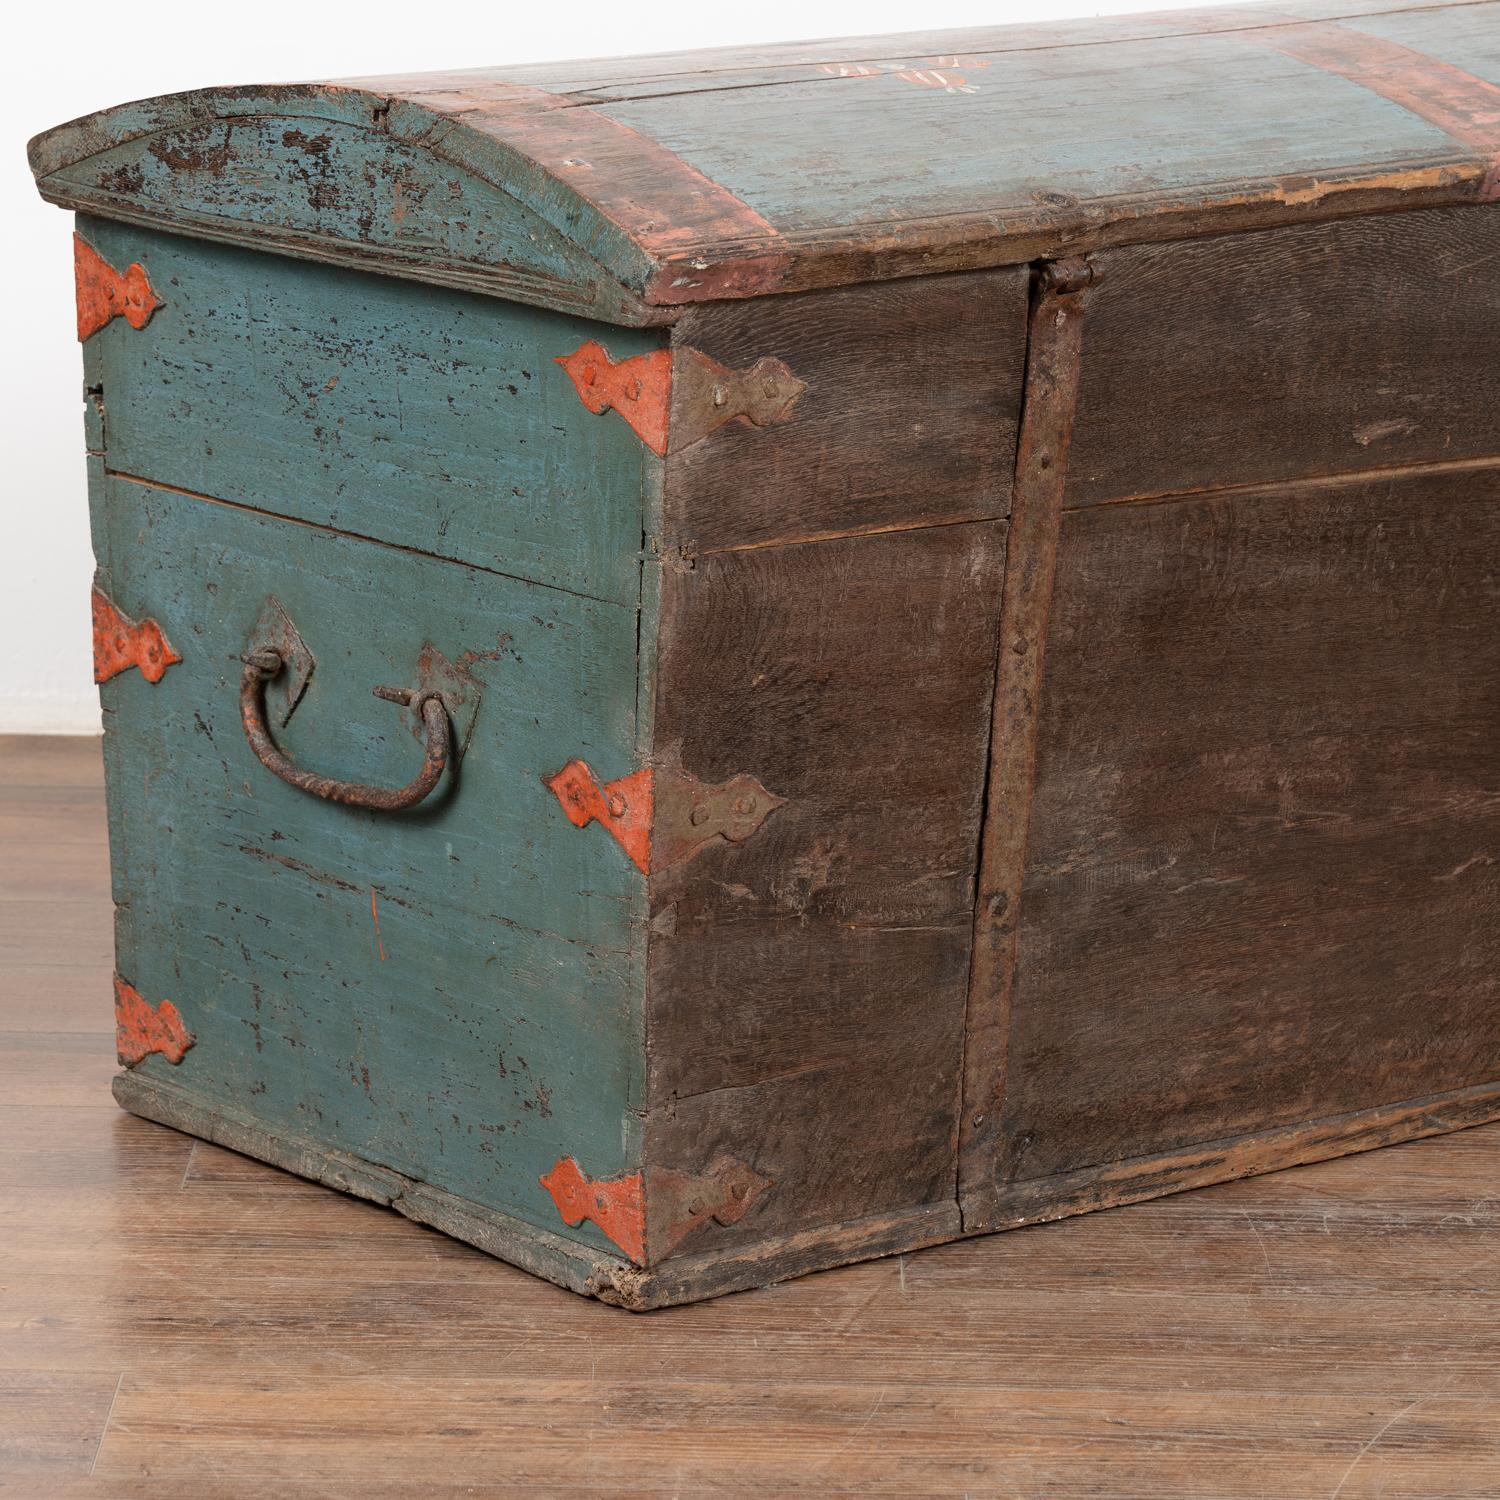 Original Blue Painted Dome Top Trunk from Sweden dated 1804 For Sale 5